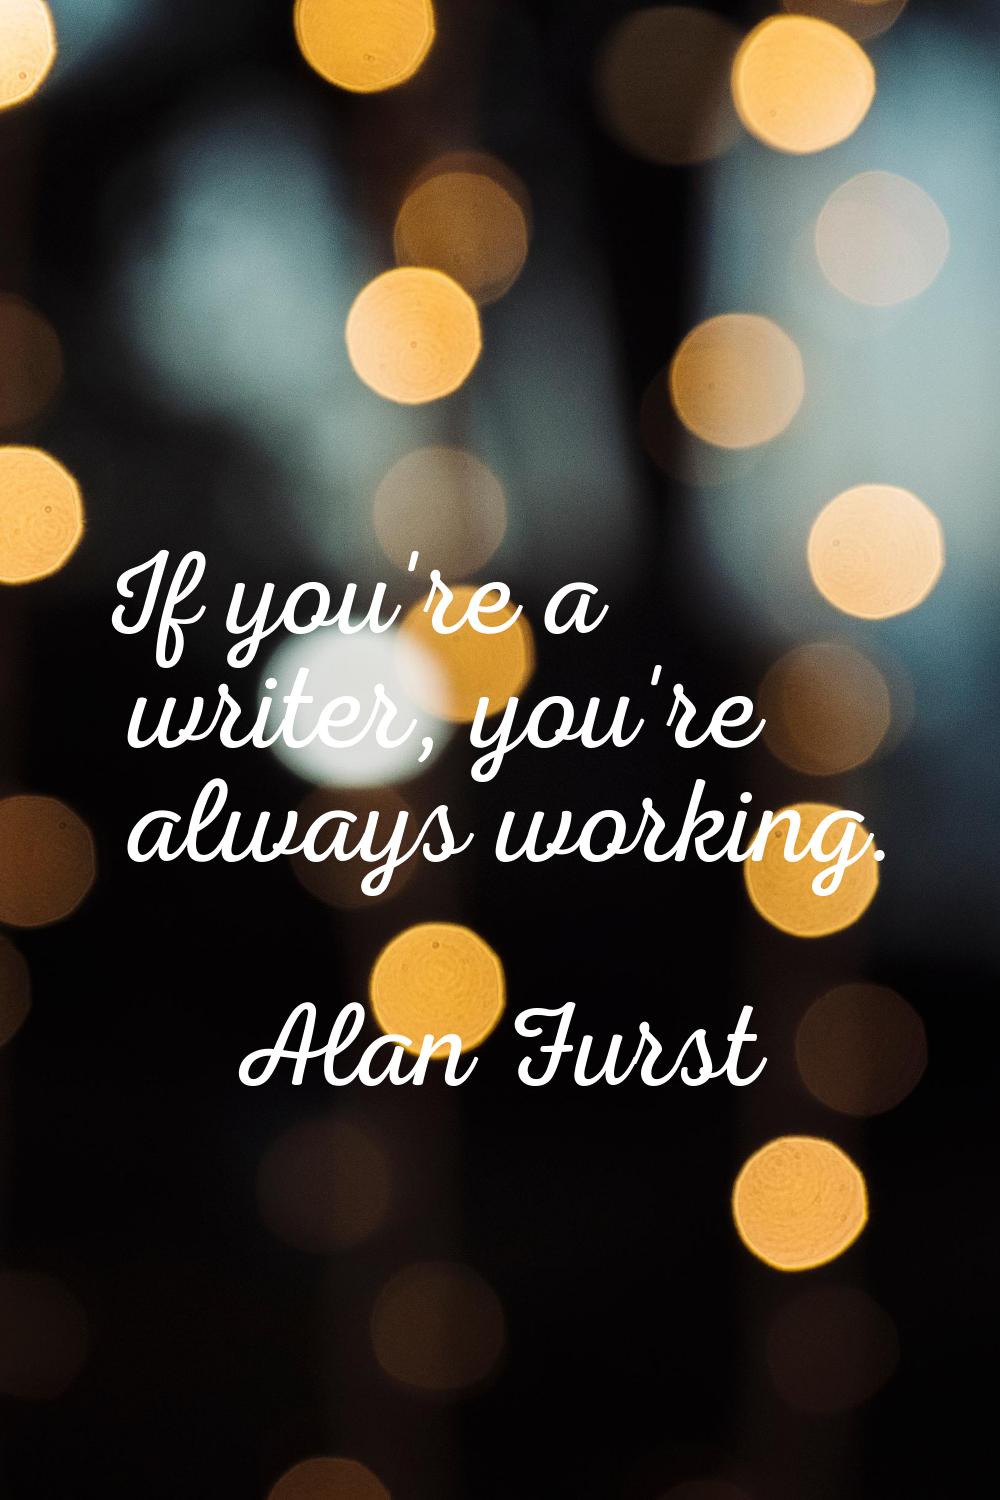 If you're a writer, you're always working.